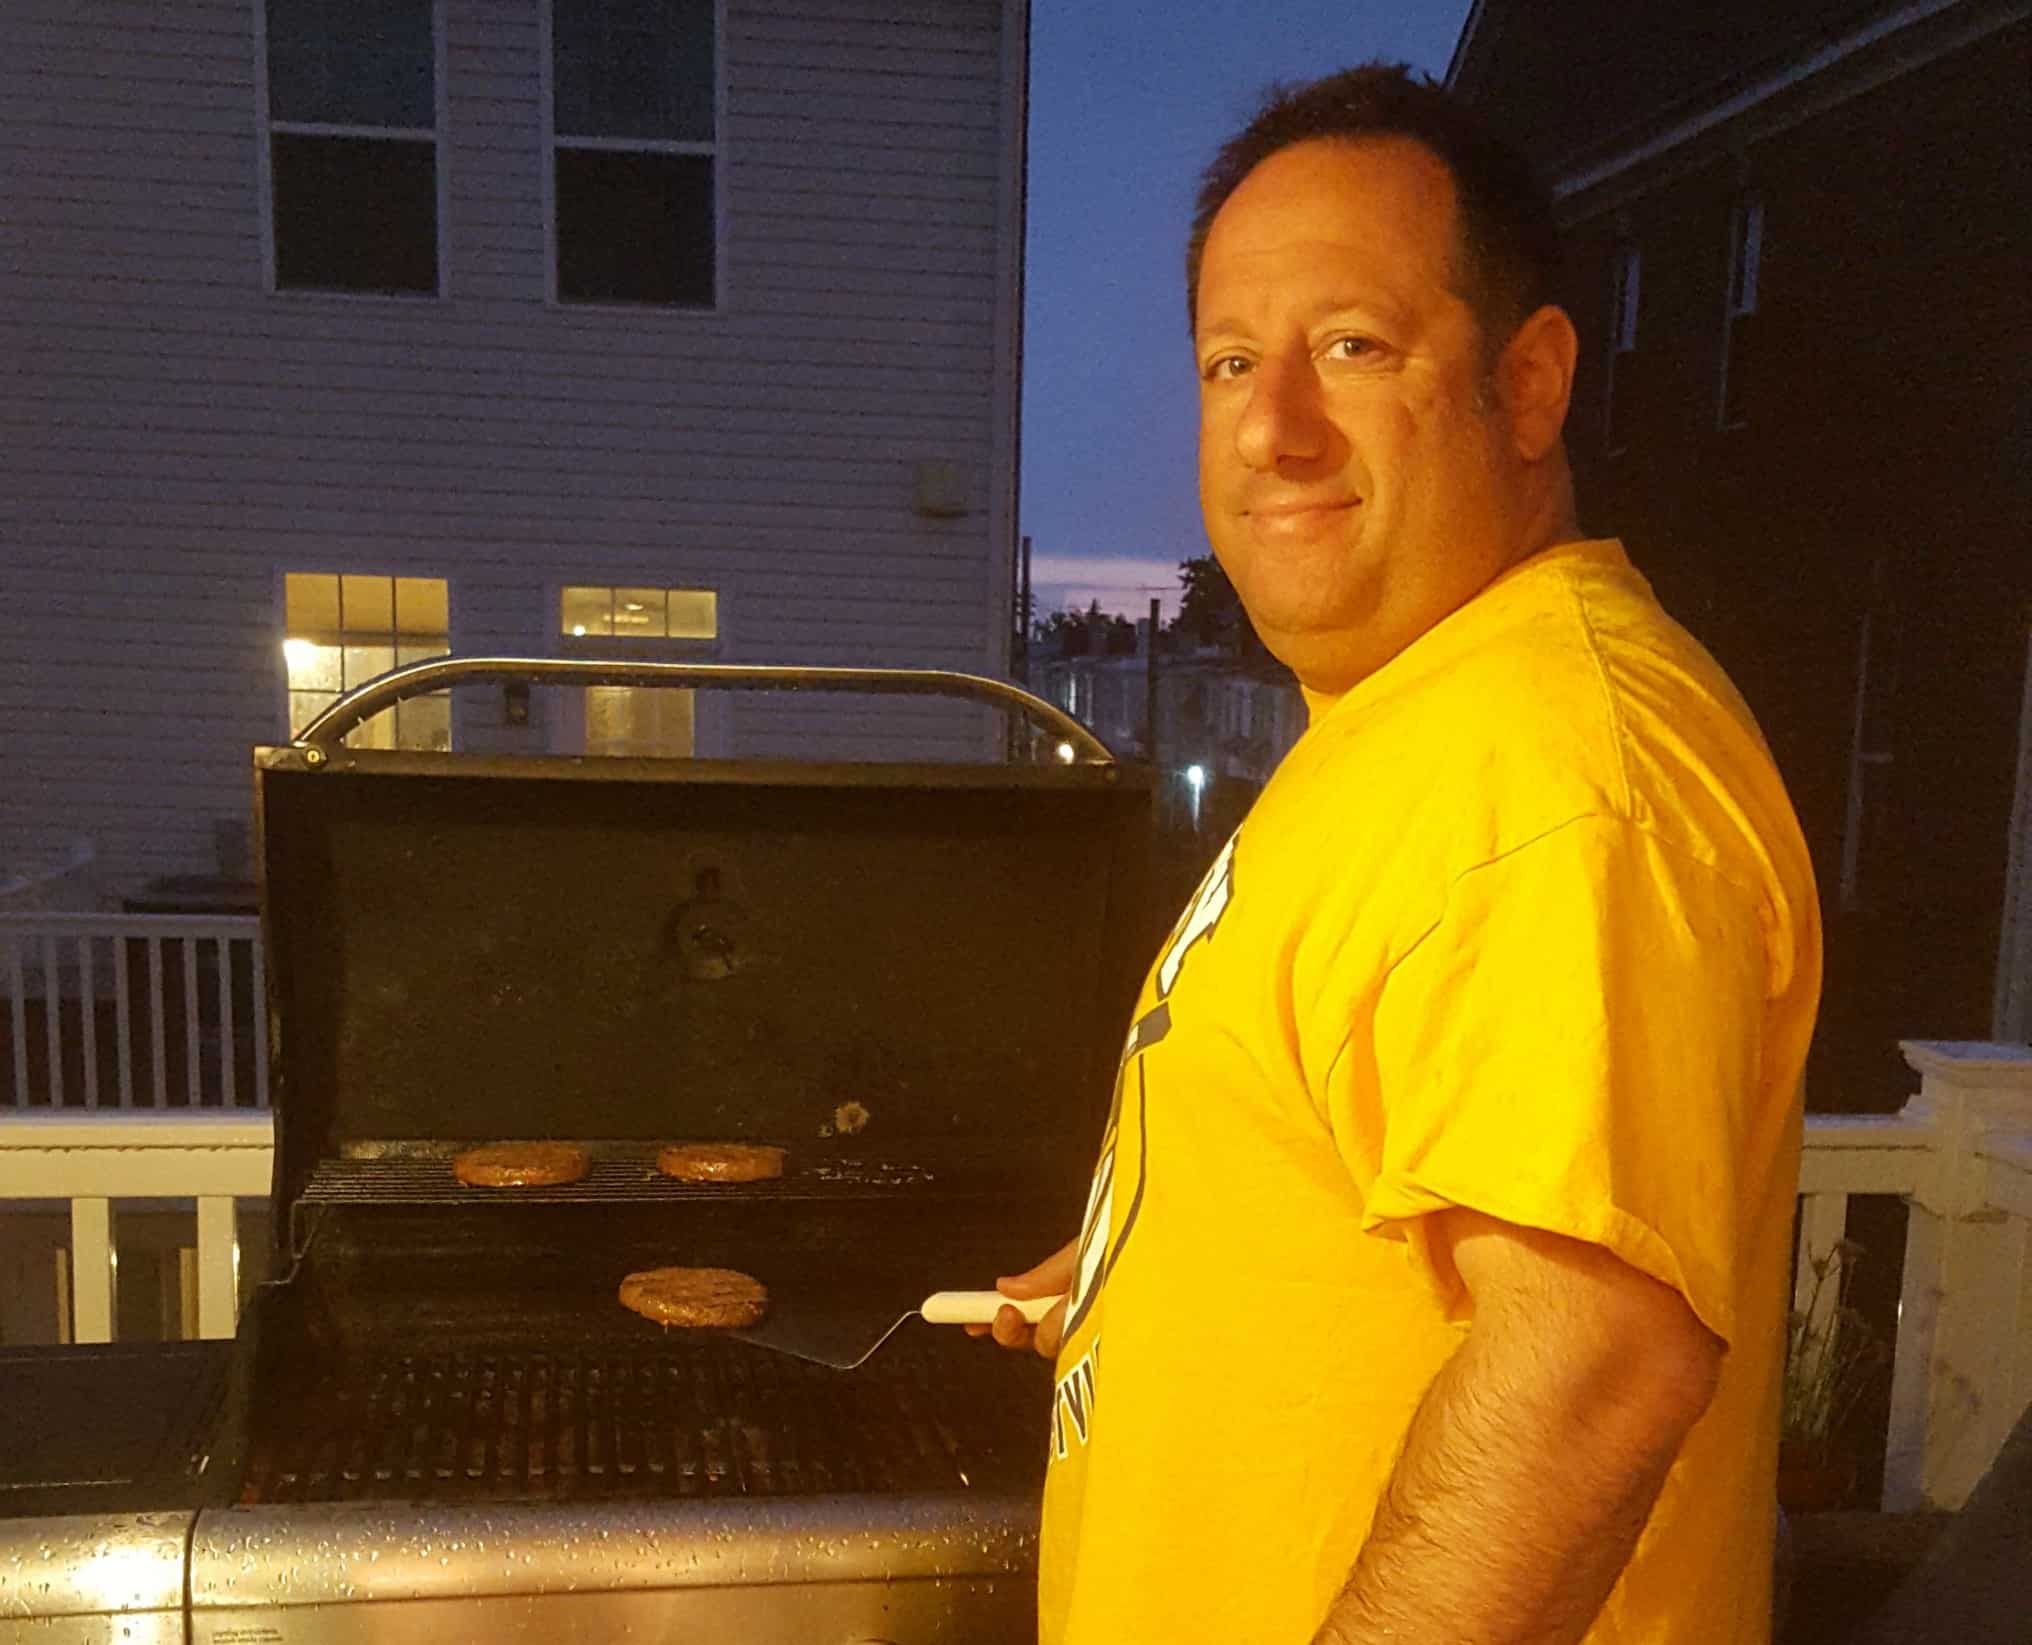 Hubby grilling burgers in the rain  